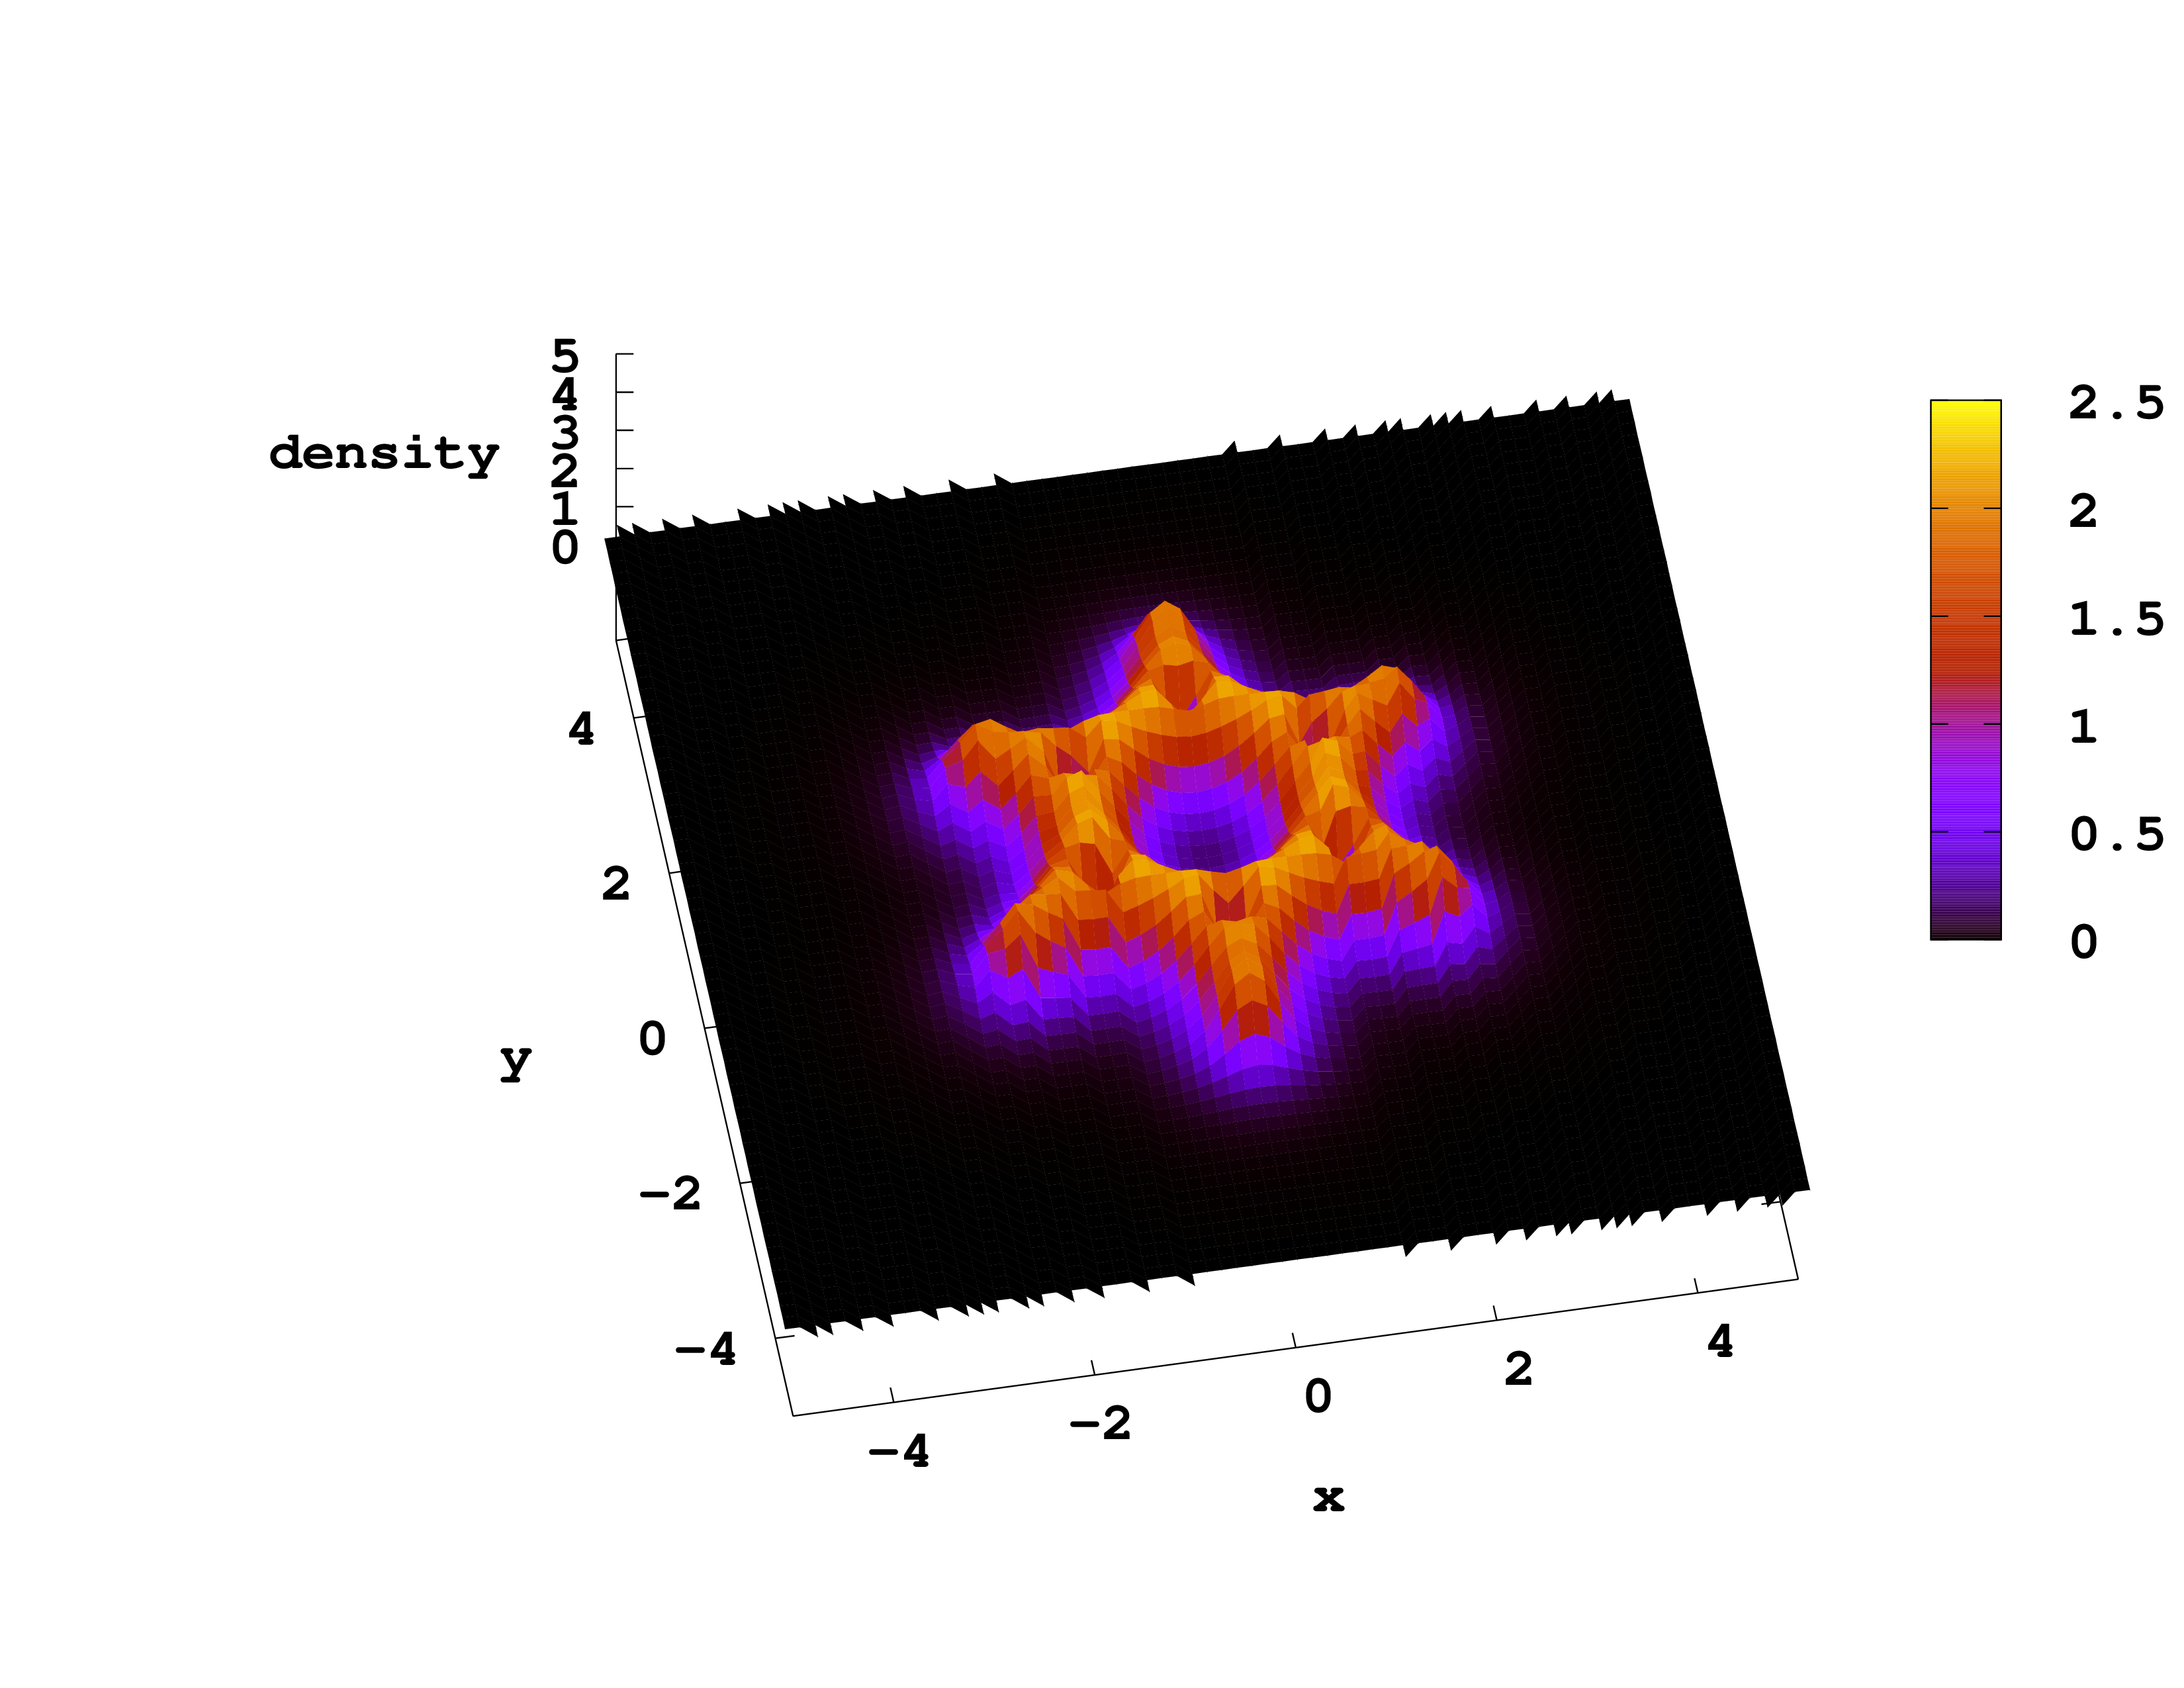 Electronic density of benzene along the z=0 plane. Generated in Gnuplot with the 'pm3d' option.